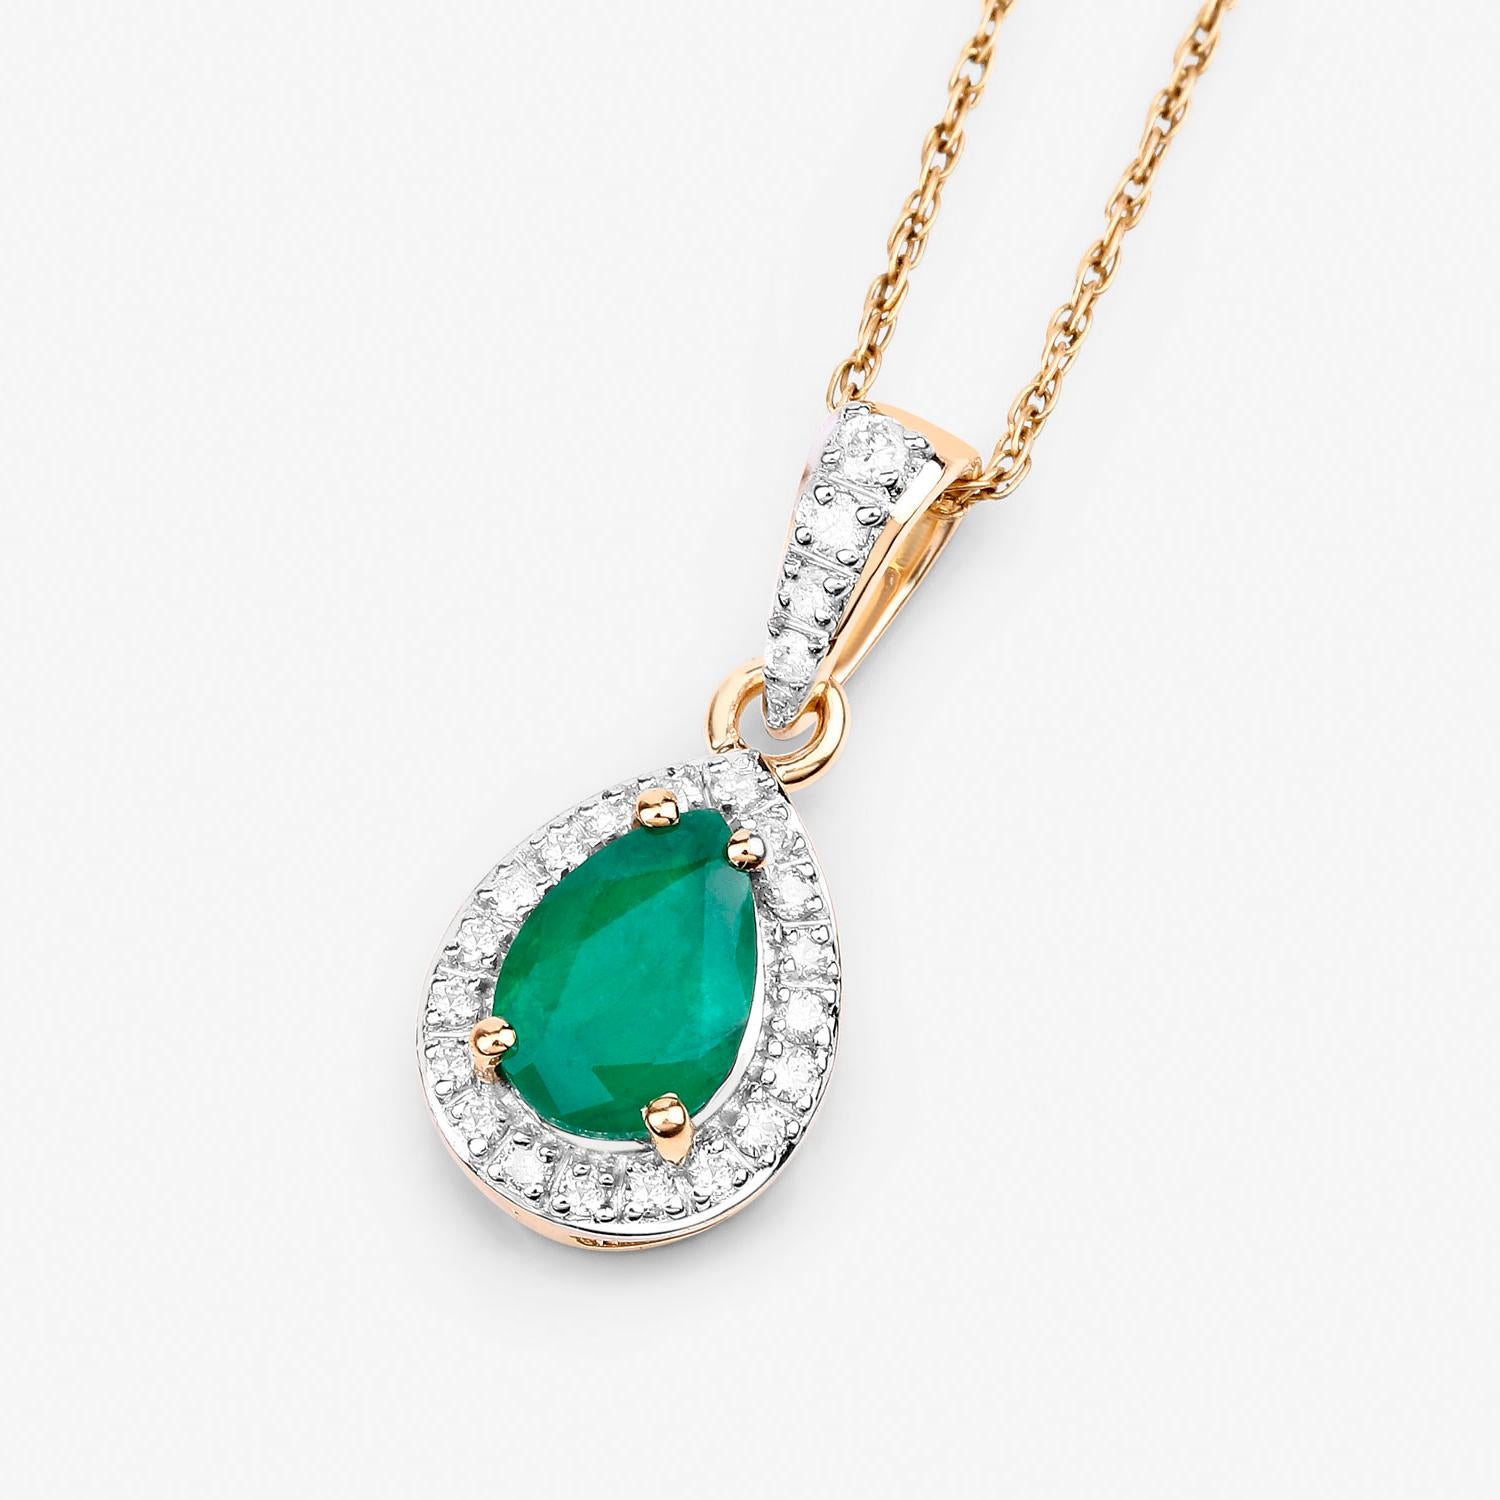 Pear Cut Zambian Emerald Pendant Necklace With Diamonds 0.77 Carats 14K Yellow Gold For Sale